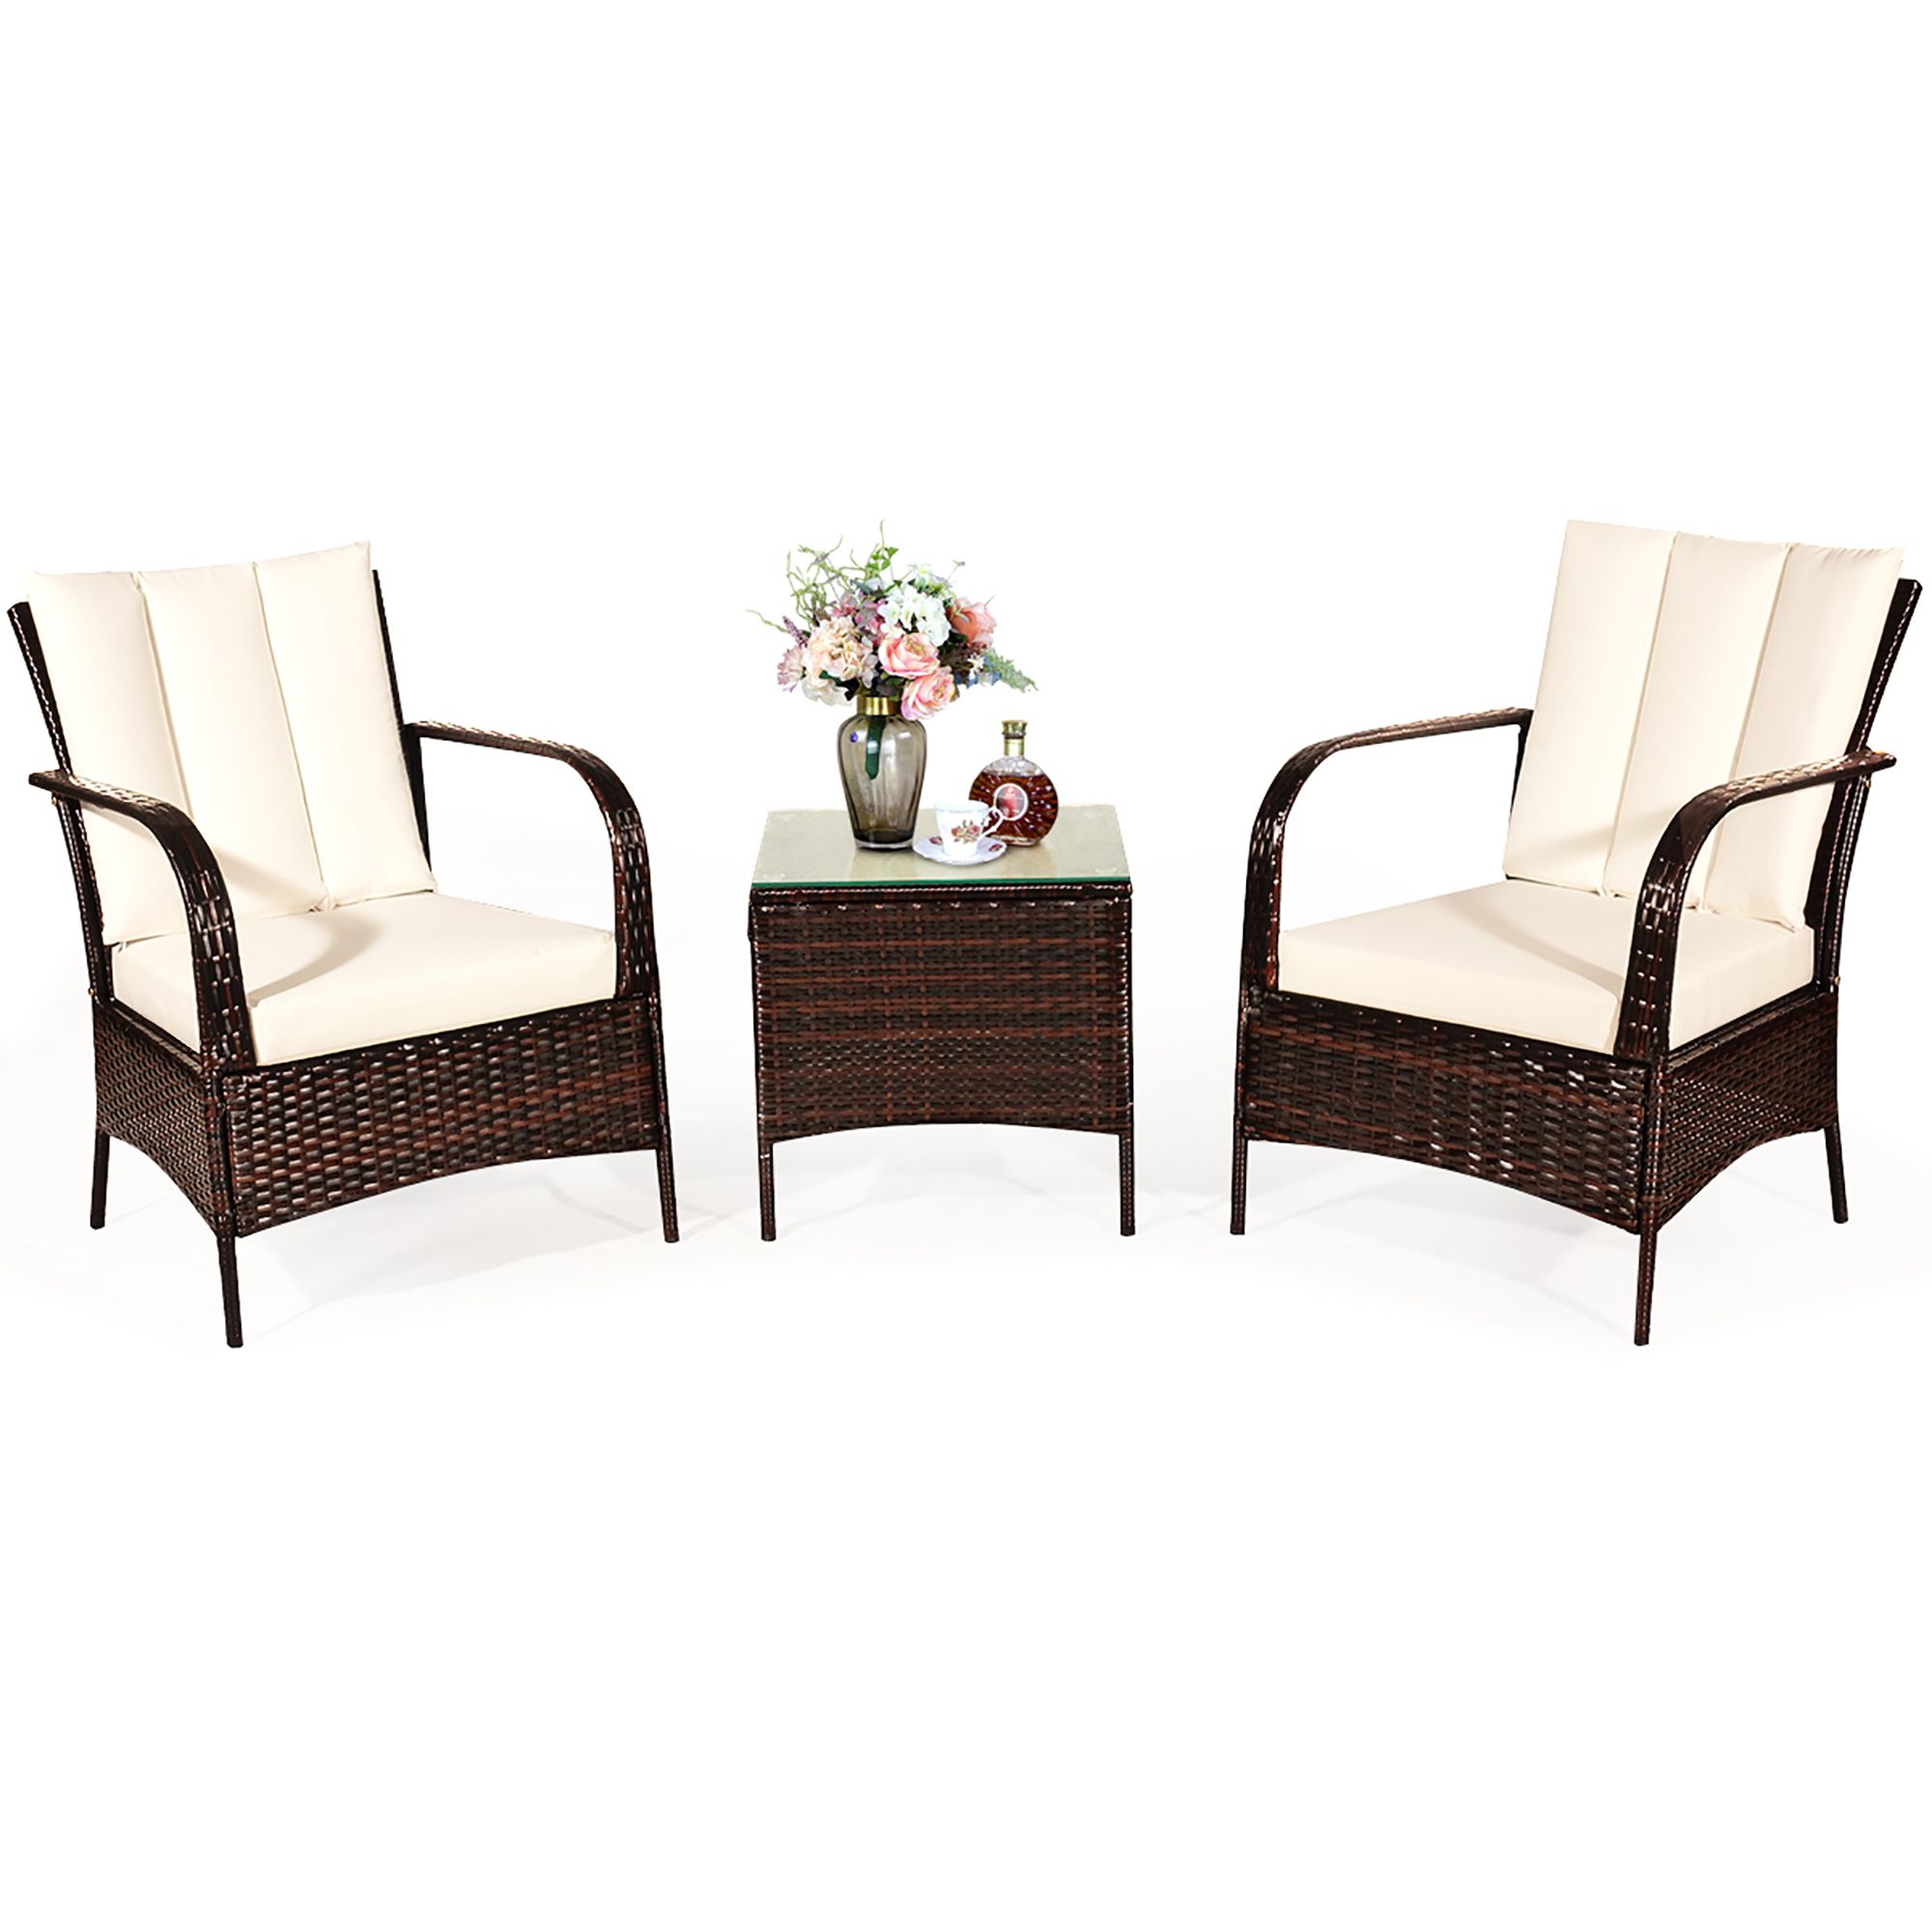 Most Popular Goplus 3 Piece Patio Wicker Rattan Furniture Set Coffee Table & 2 Intended For 3 Piece Outdoor Table And Loveseat Sets (View 13 of 15)